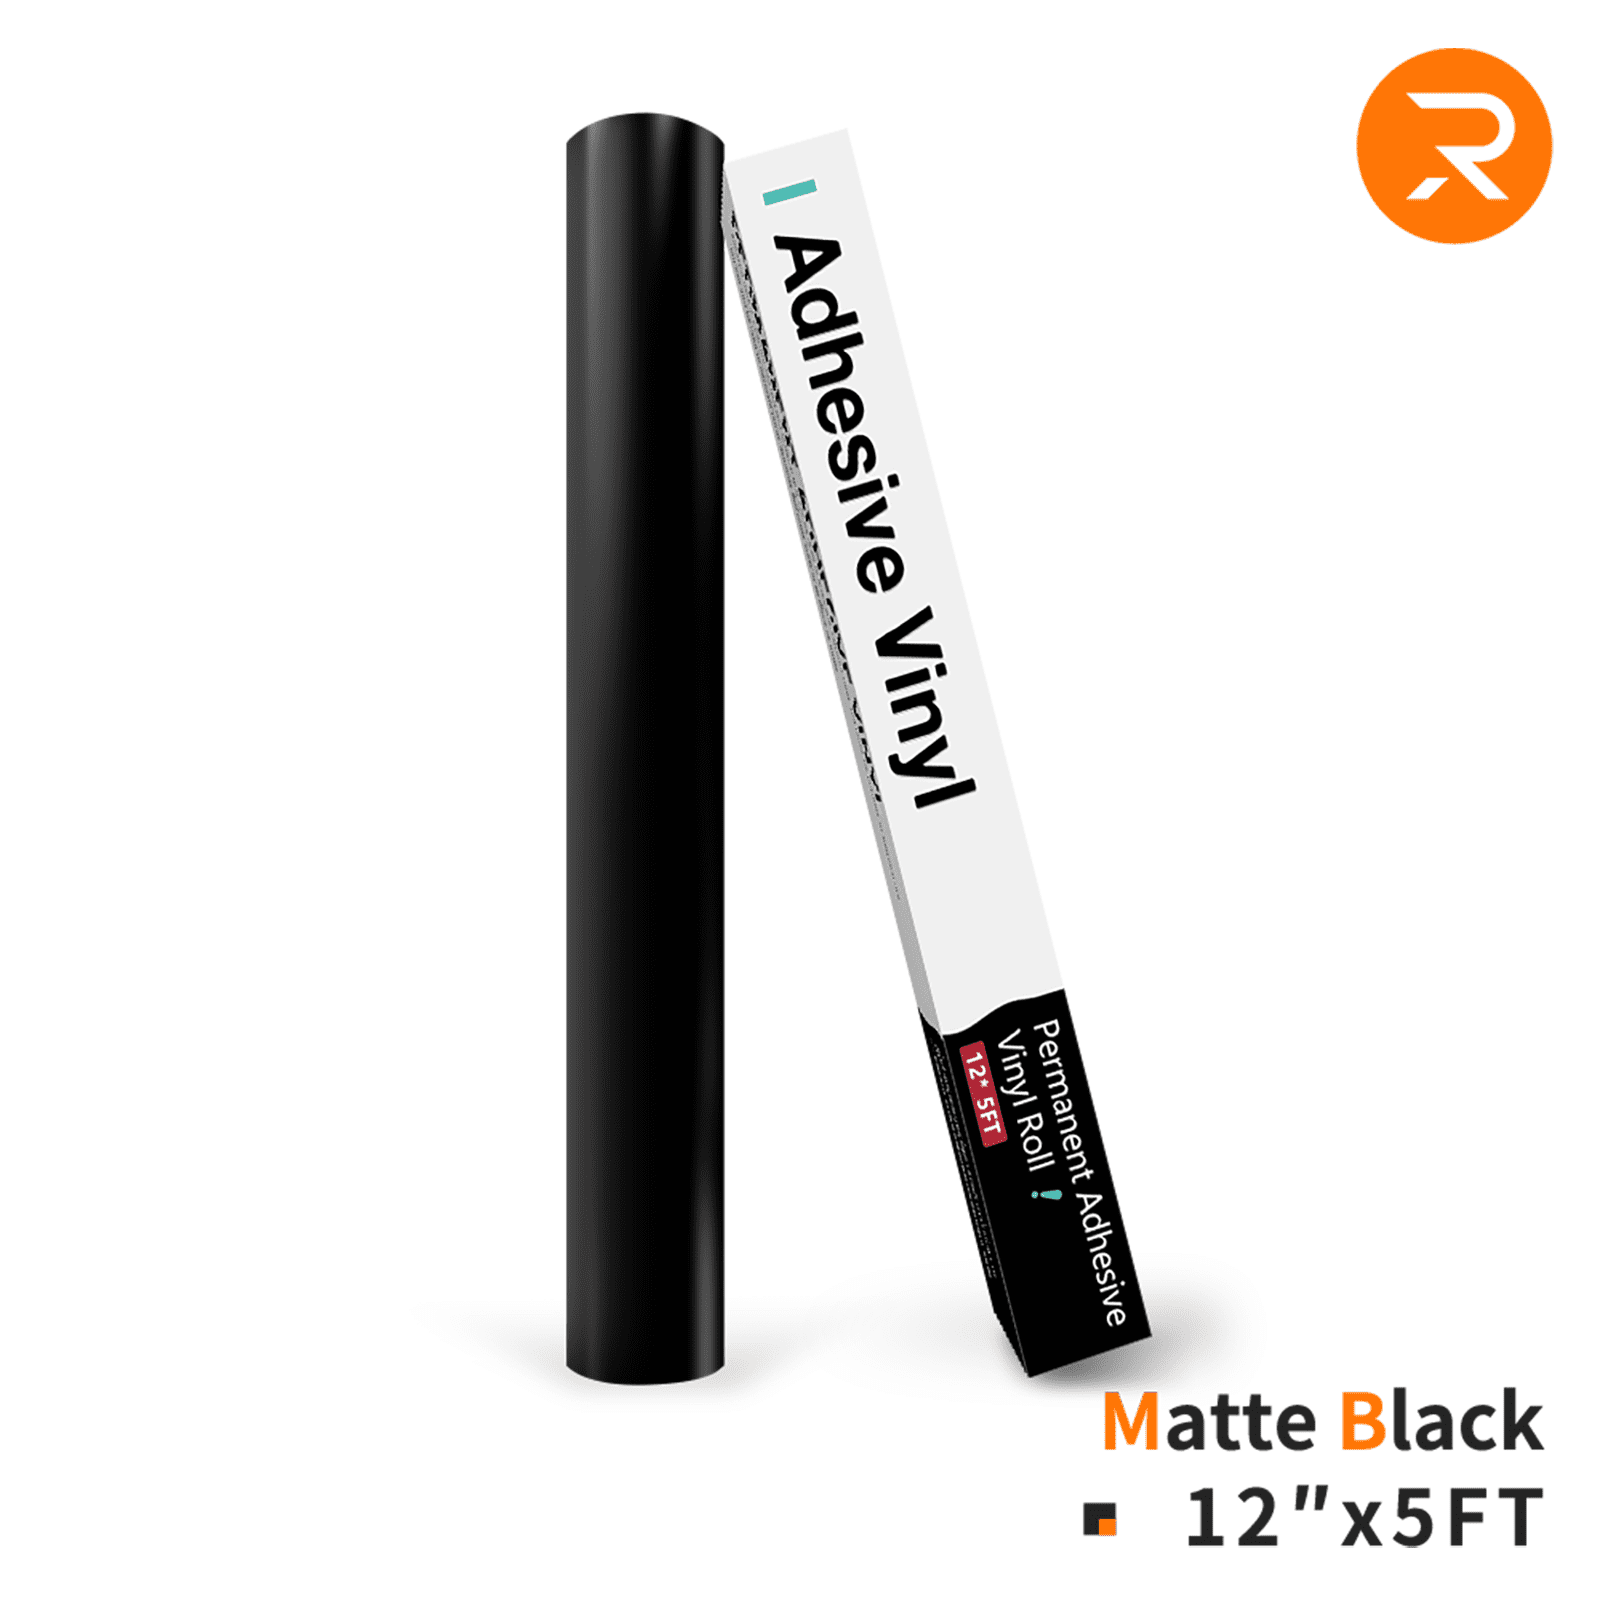 Huaxing Matte Black Permanent Vinyl for Cricut, 12 x 50FT Permanent  Adhesive Vinyl Roll for Cricut, Silhouette, Cameo Cutters, Signs, Craft Die